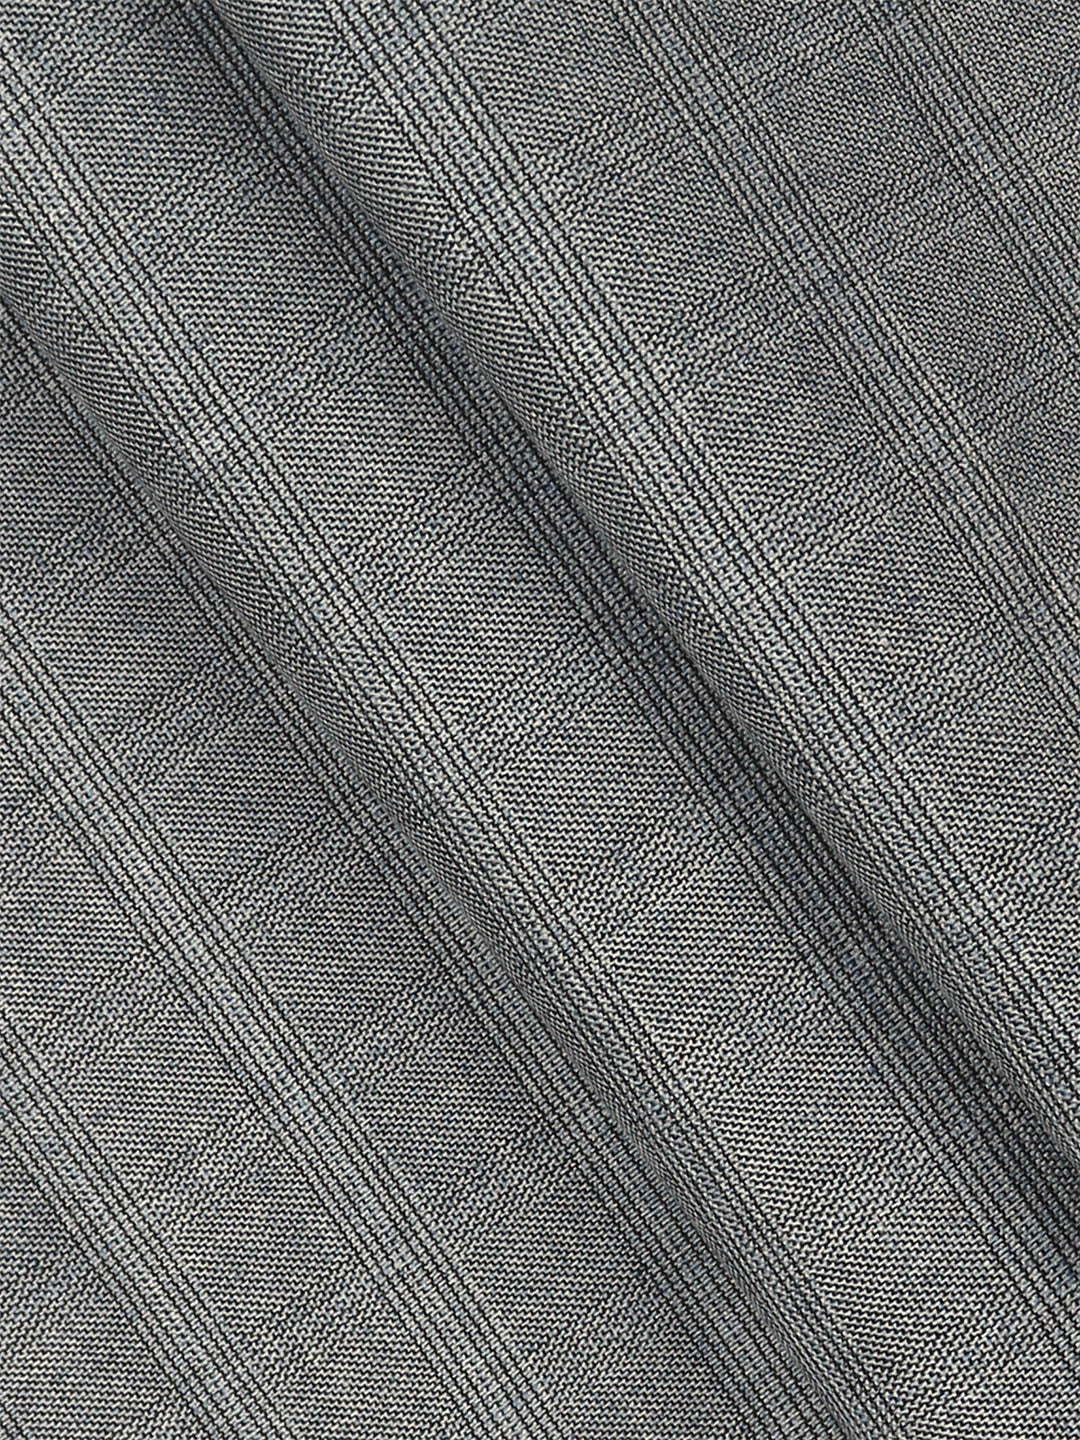 Cotton Smart Look Grey Checked Suiting Fabric-Enable Stretch